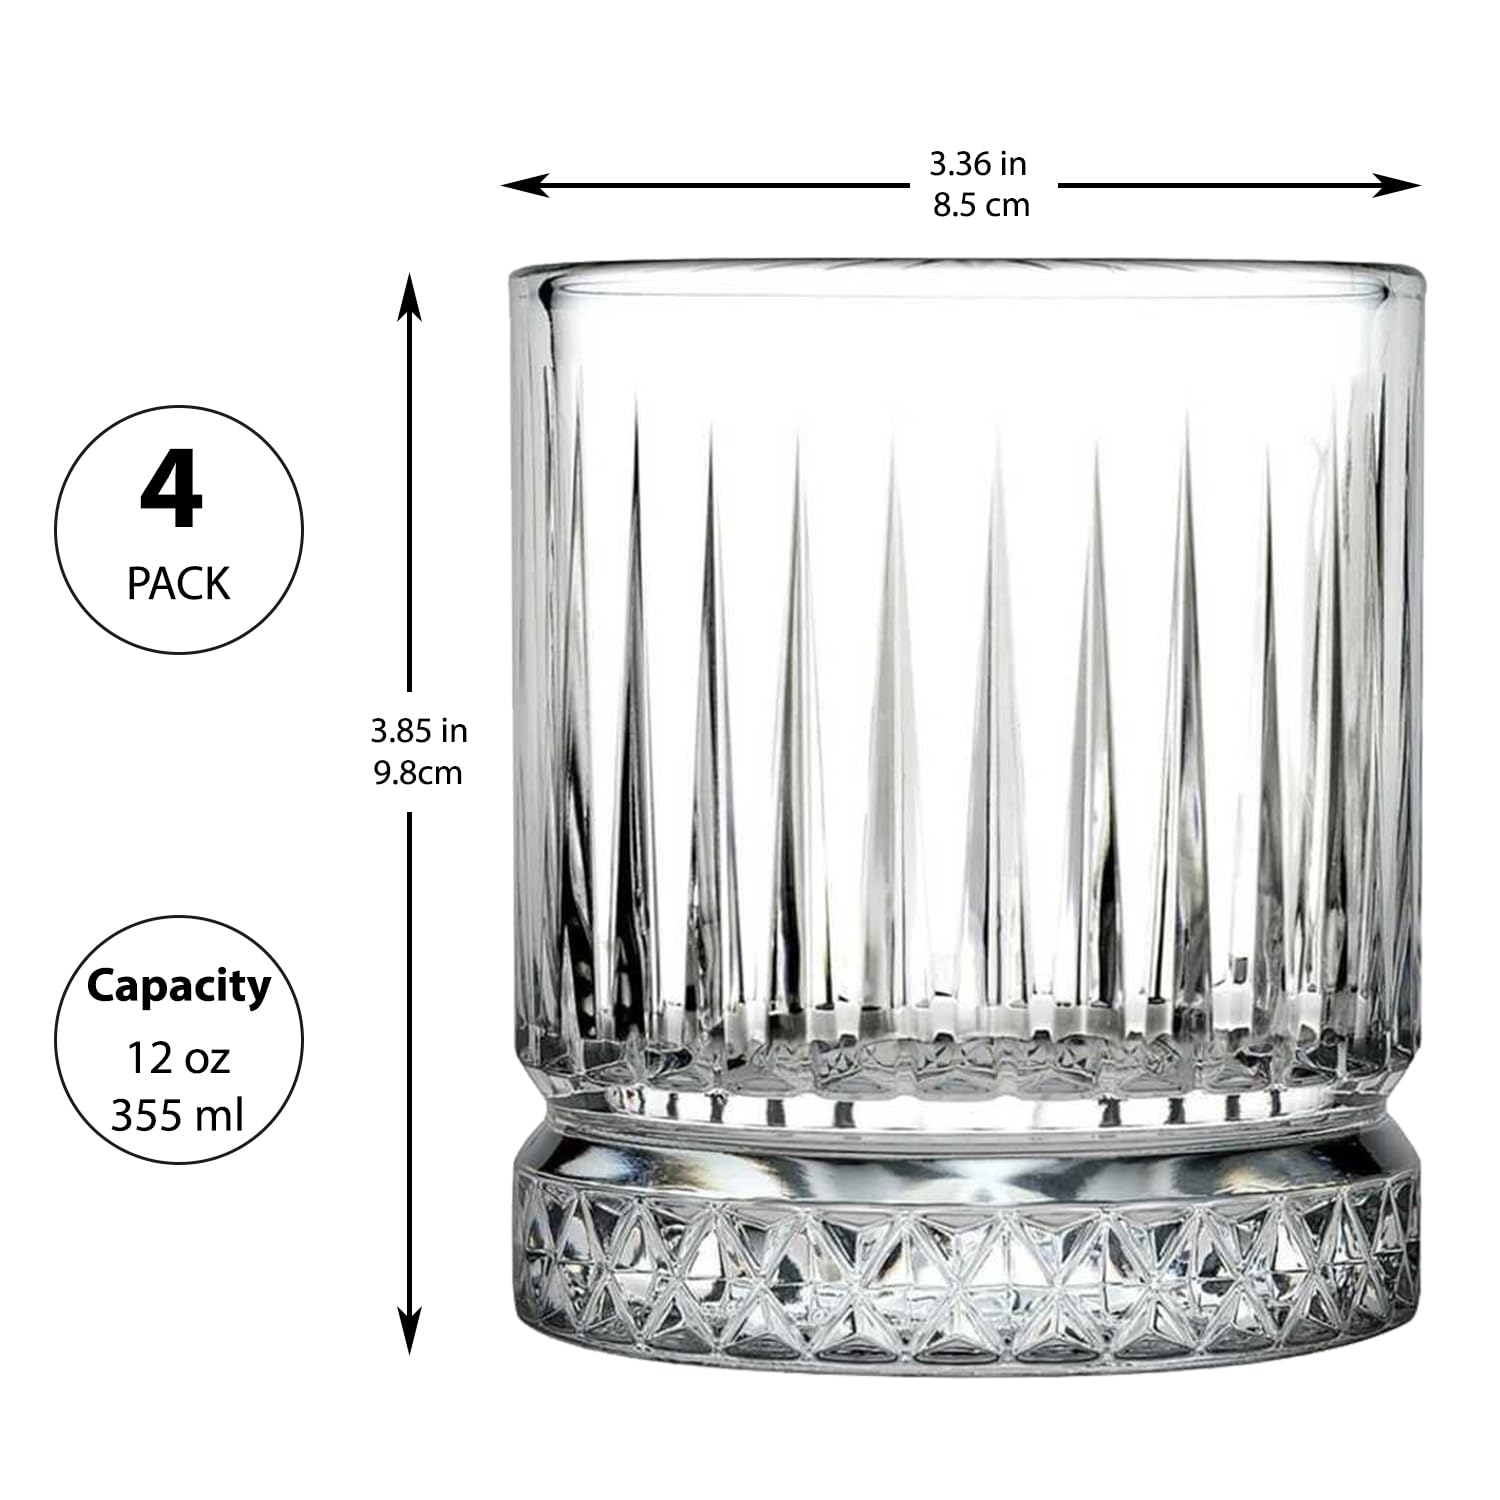 Biandeco Pink Whiskey Glasses, Lowball Rock Barware Set of 4, Colored Old Fashioned Tumbler with Heavy Base for Scotch, Bourbon, Liquor or Cocktail Drinking, 12 oz